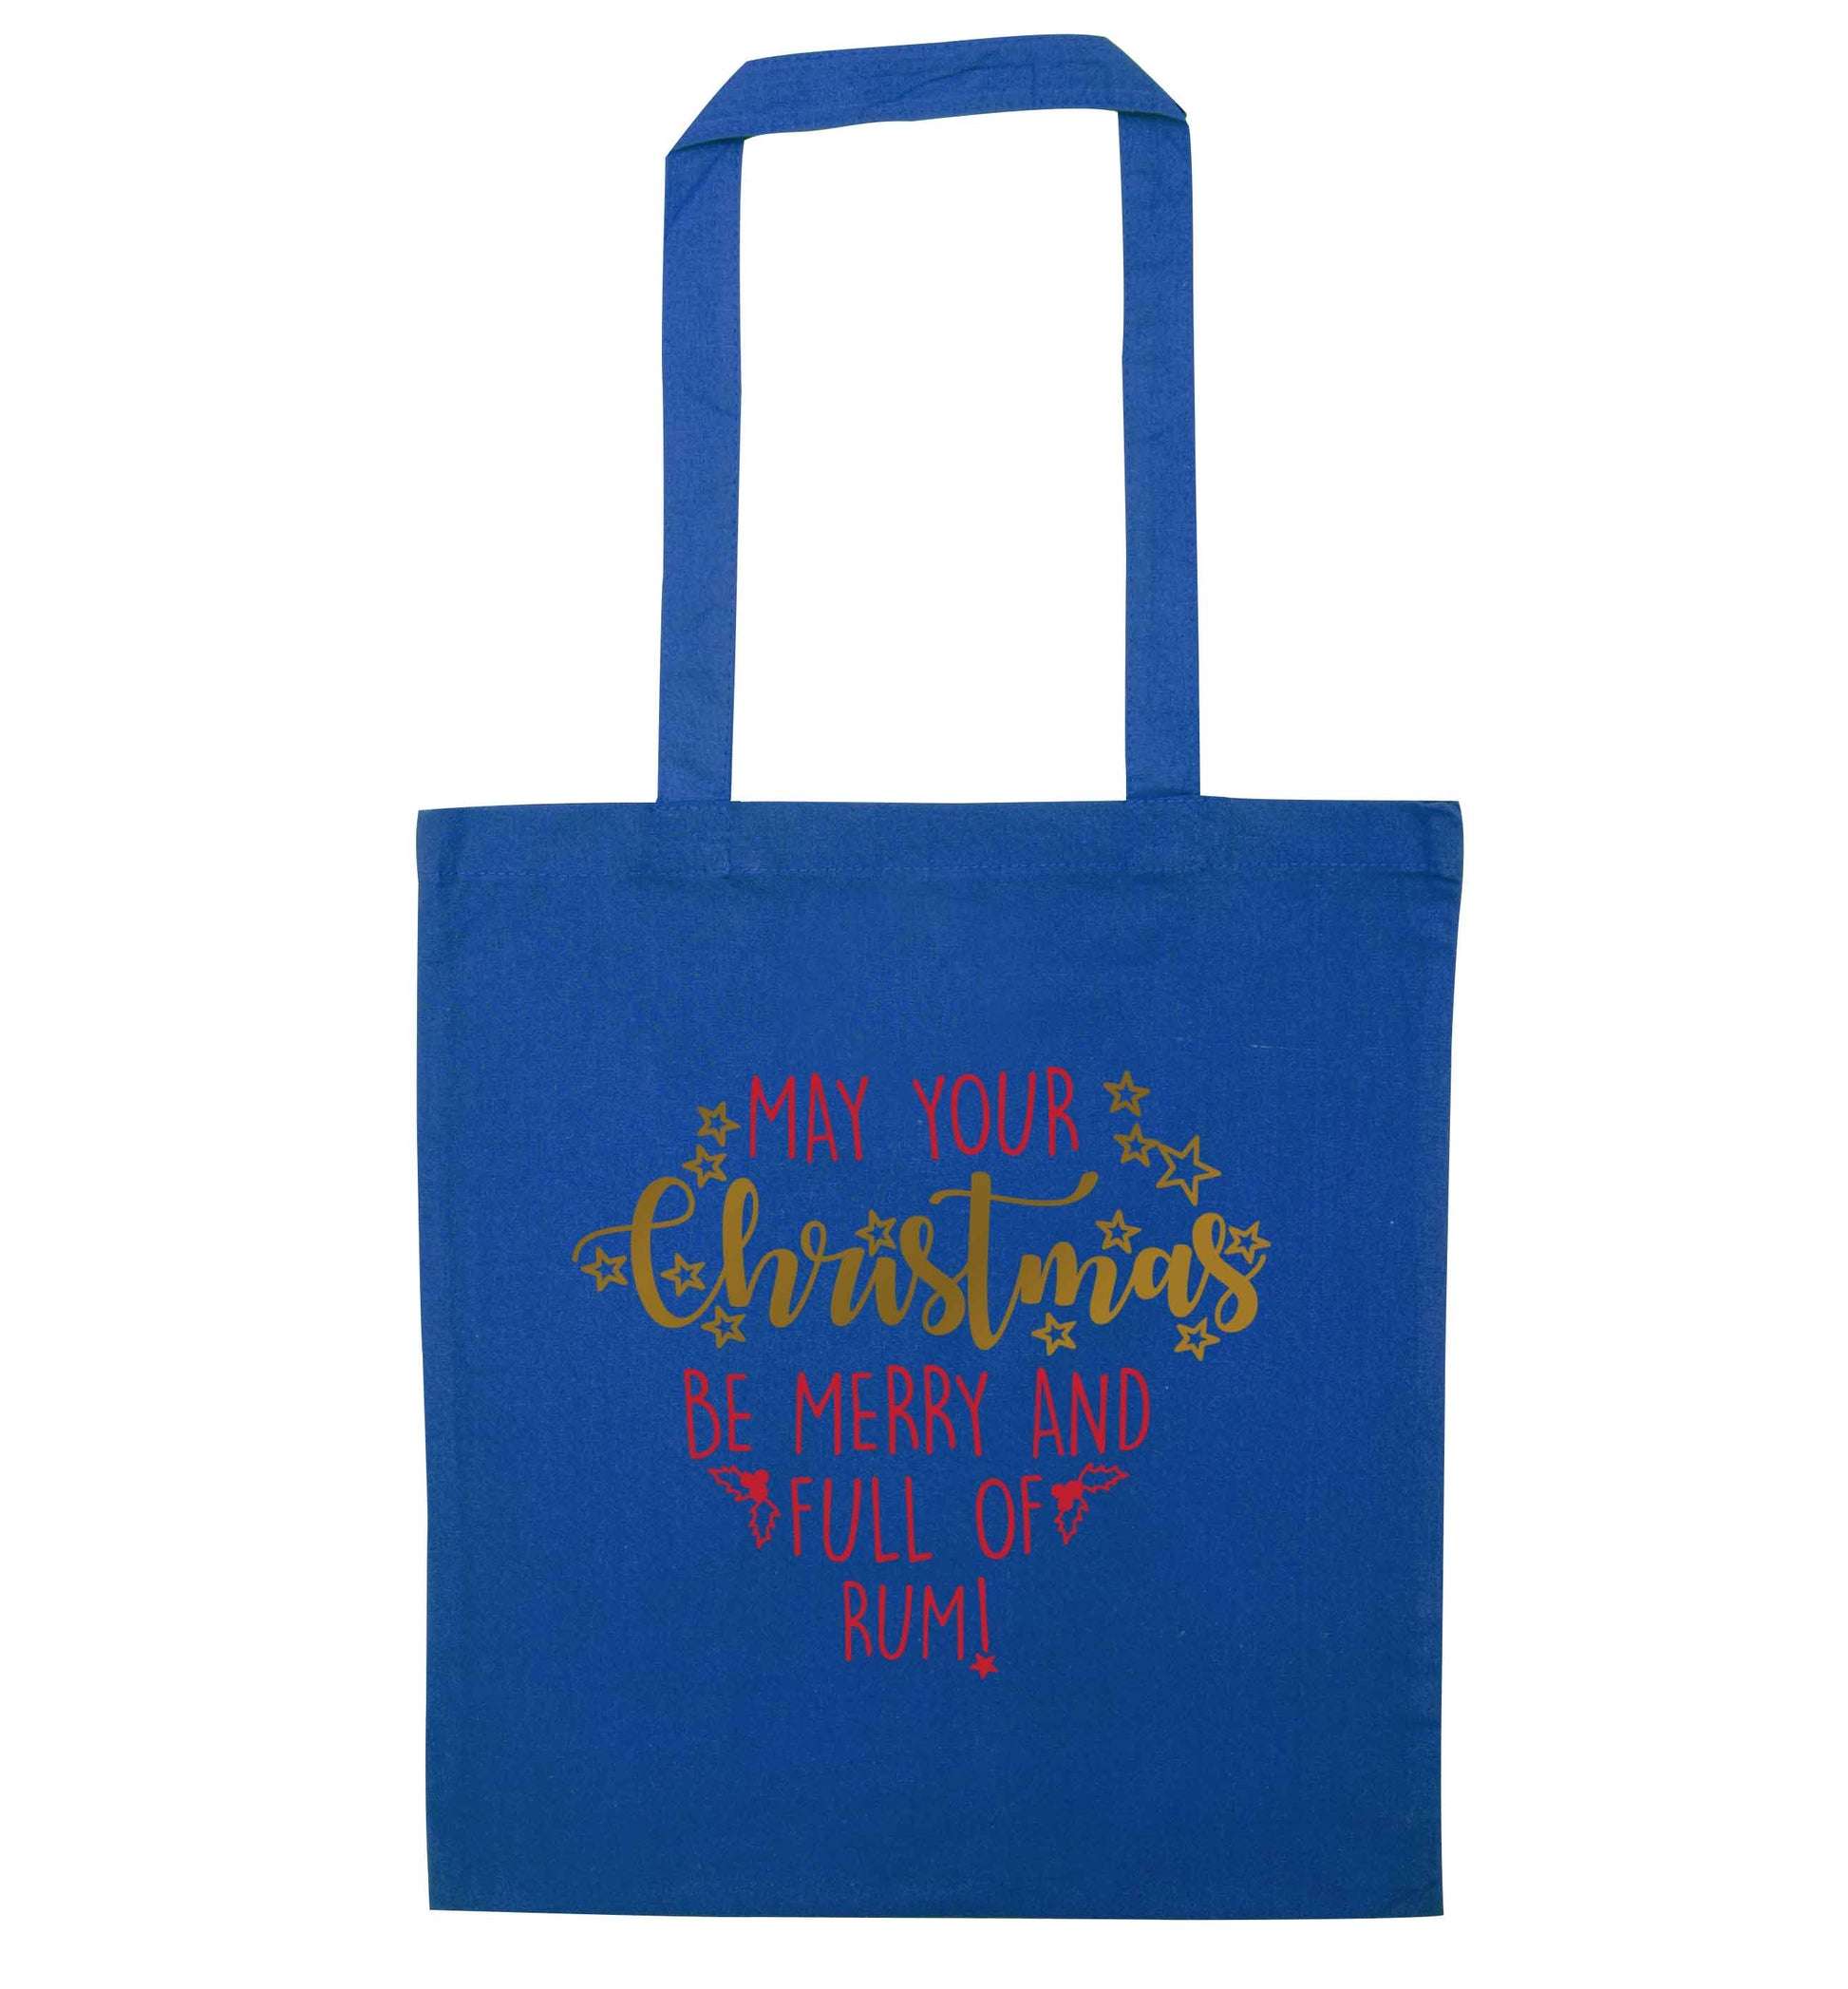 May your Christmas be merry and full of rum blue tote bag